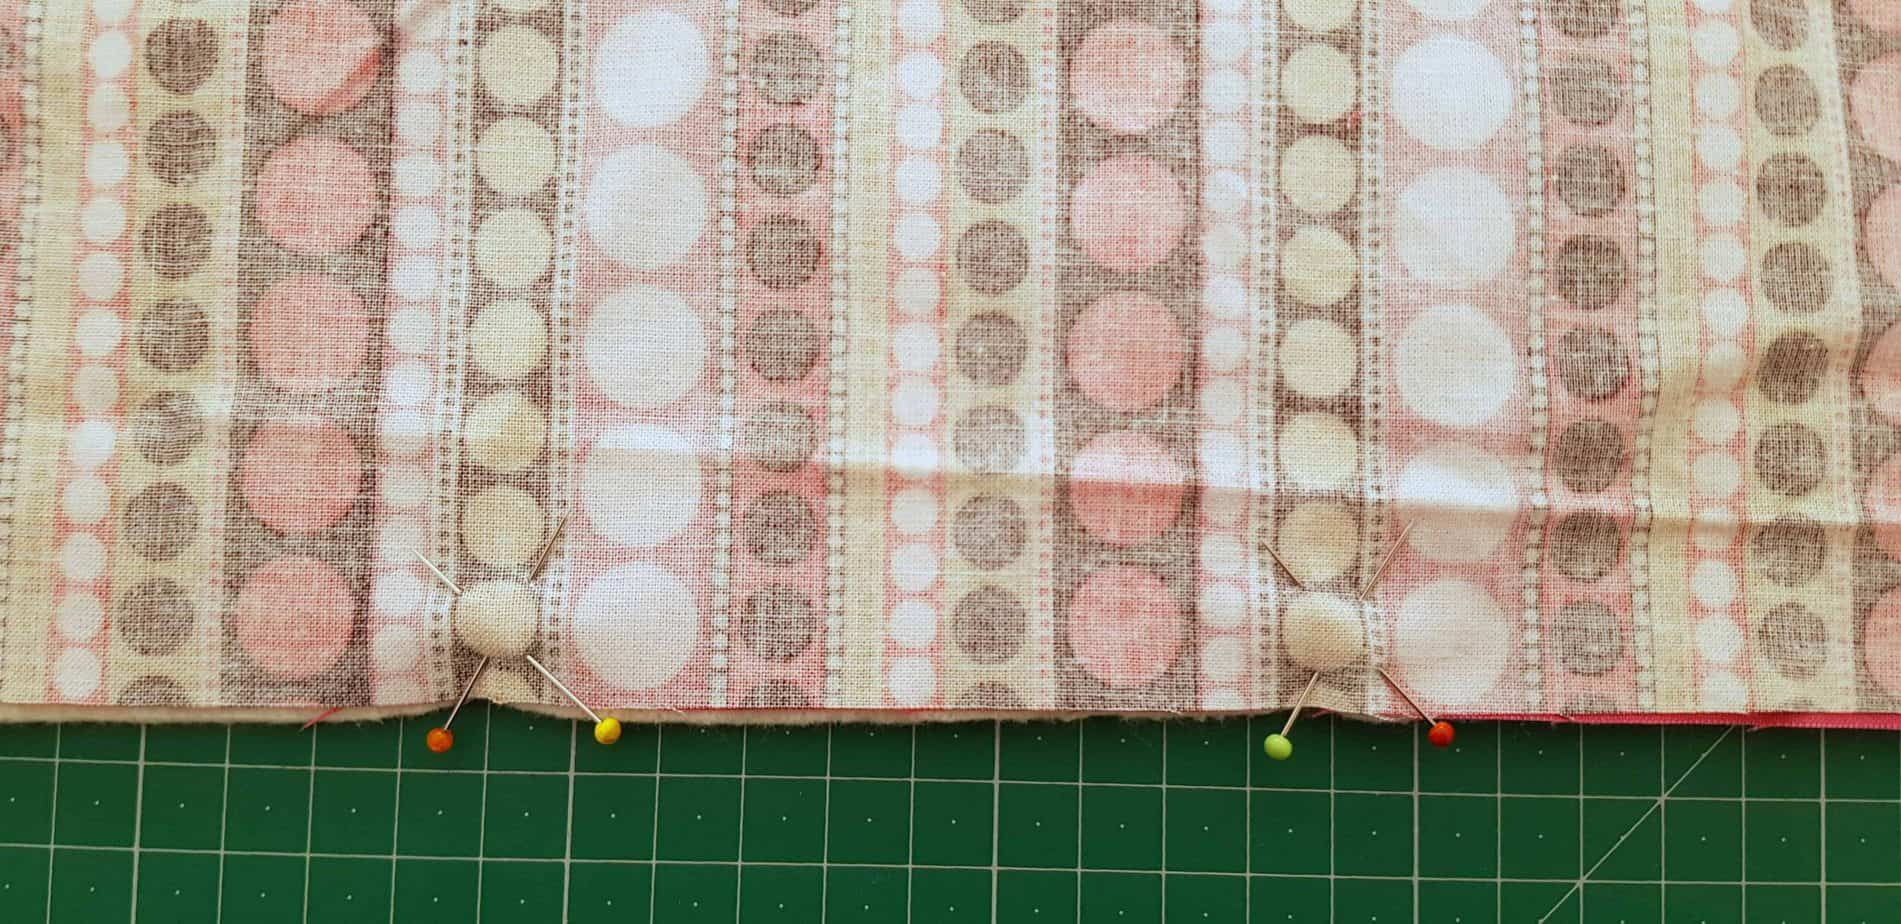 Pins pinned to edge of fabric to make a cross to mark the fabric opening.